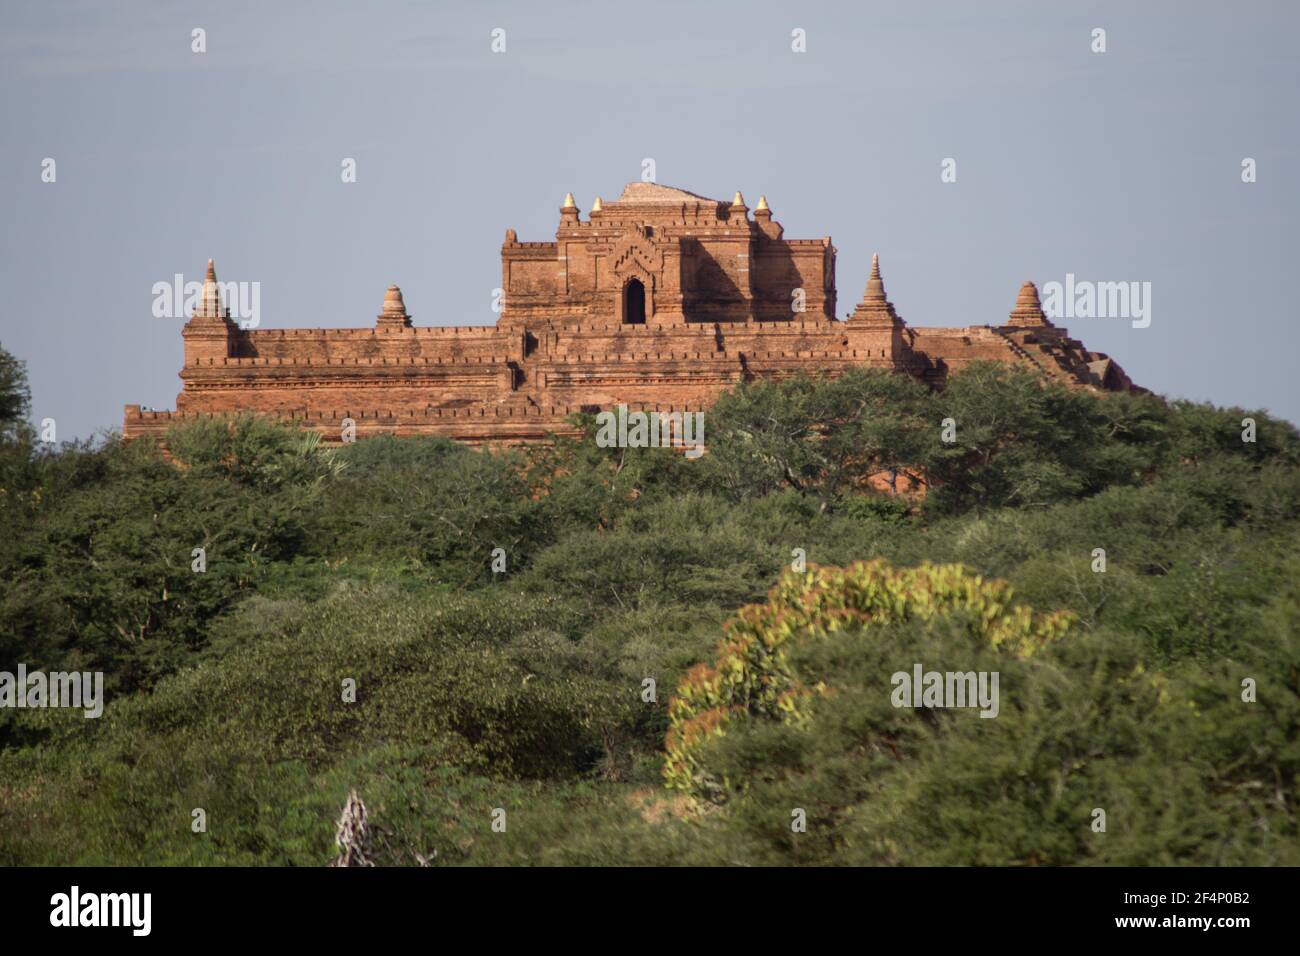 BAGAN, NYAUNG-U, MYANMAR - 3 JANUARY 2020: A huge old and historical temple pagoda upon a hill above the tree vegetation Stock Photo